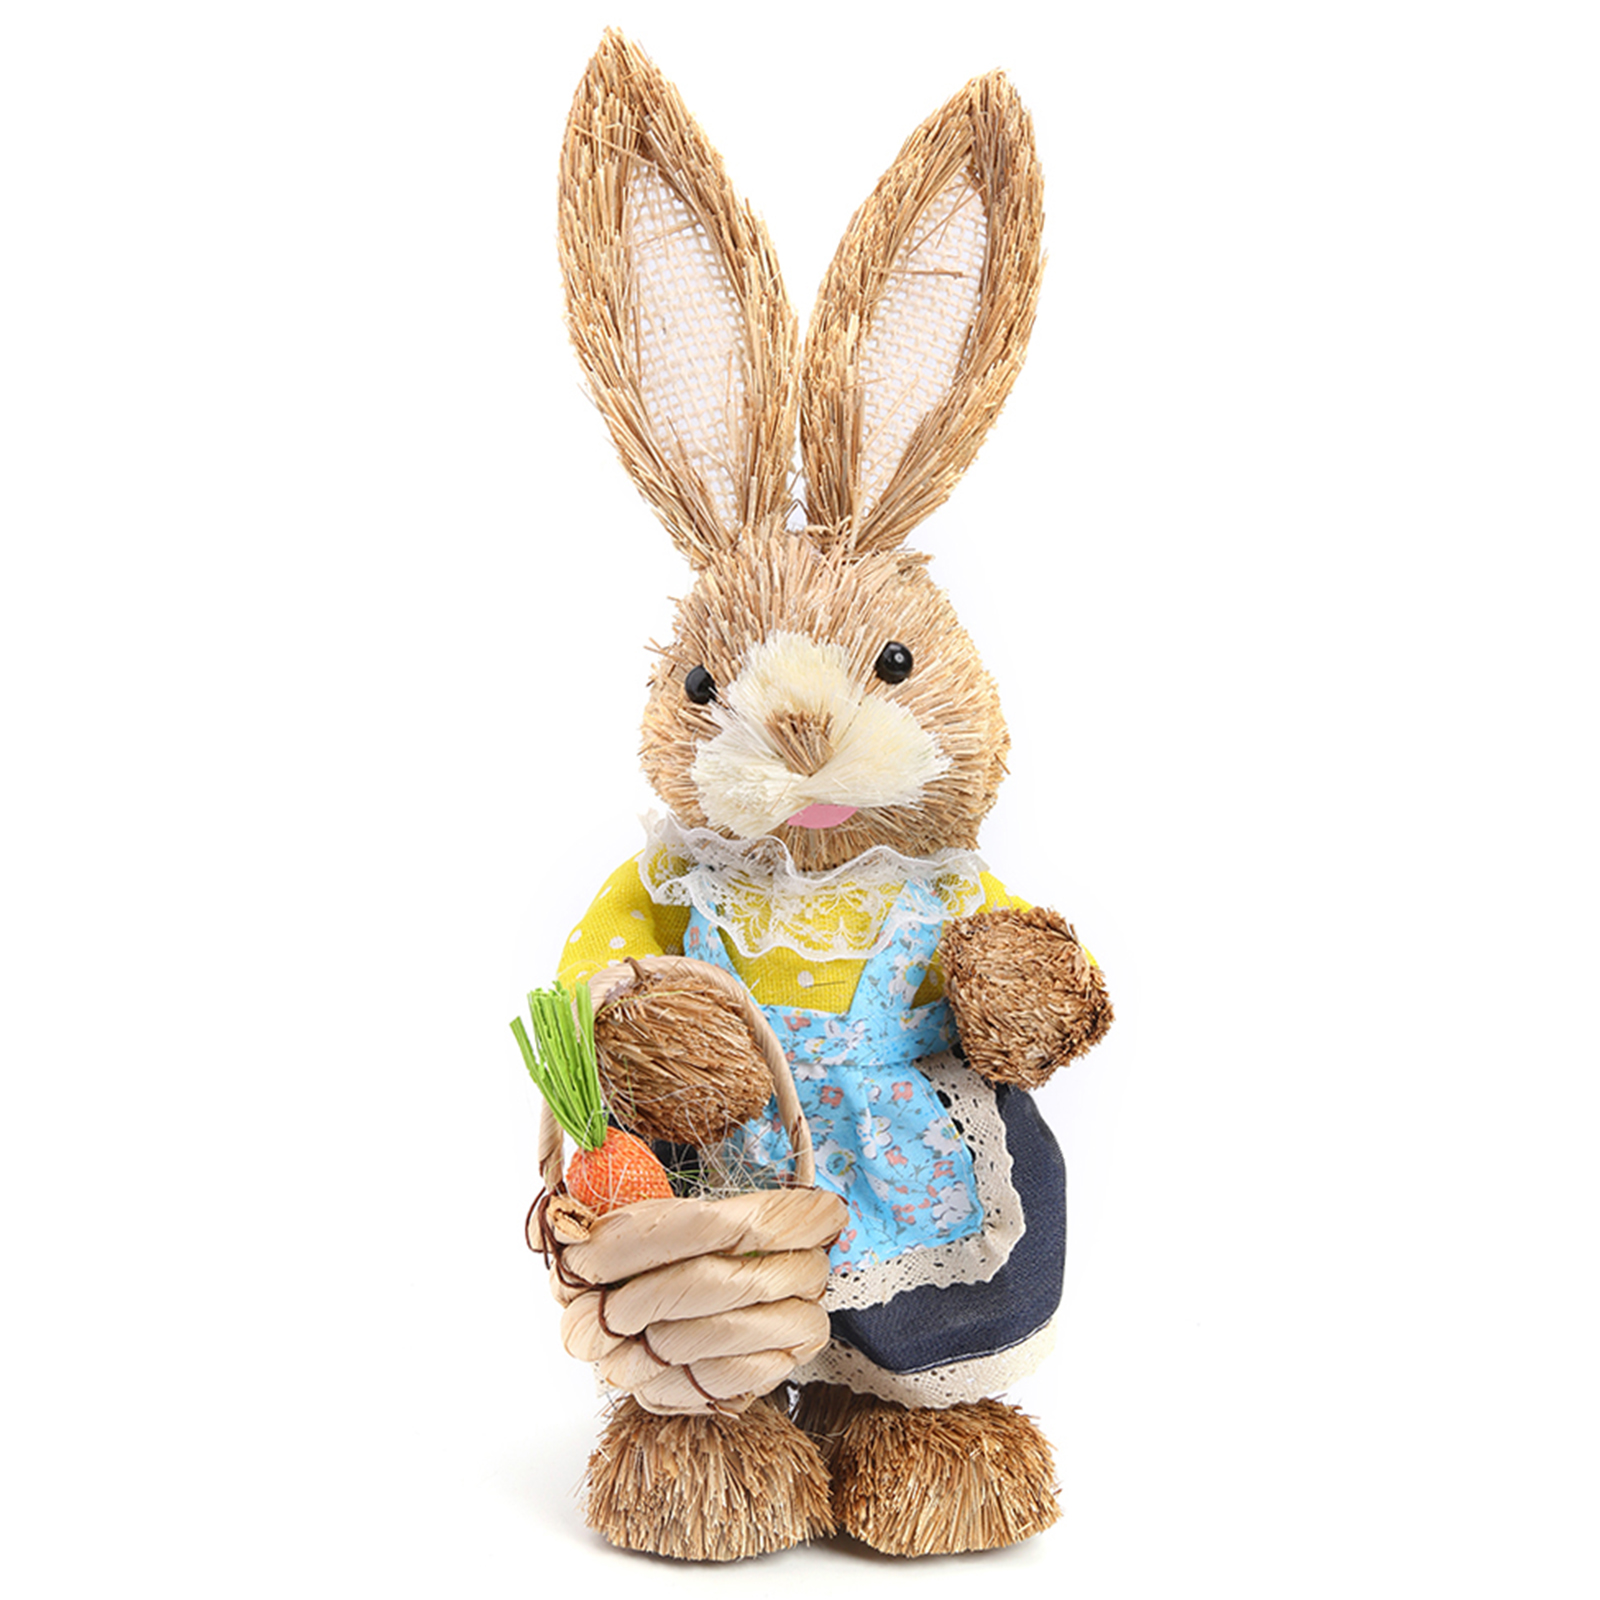 Straw Rabbit Ornament, 12 inch Standing Bunny with Carrot for Easter (9)